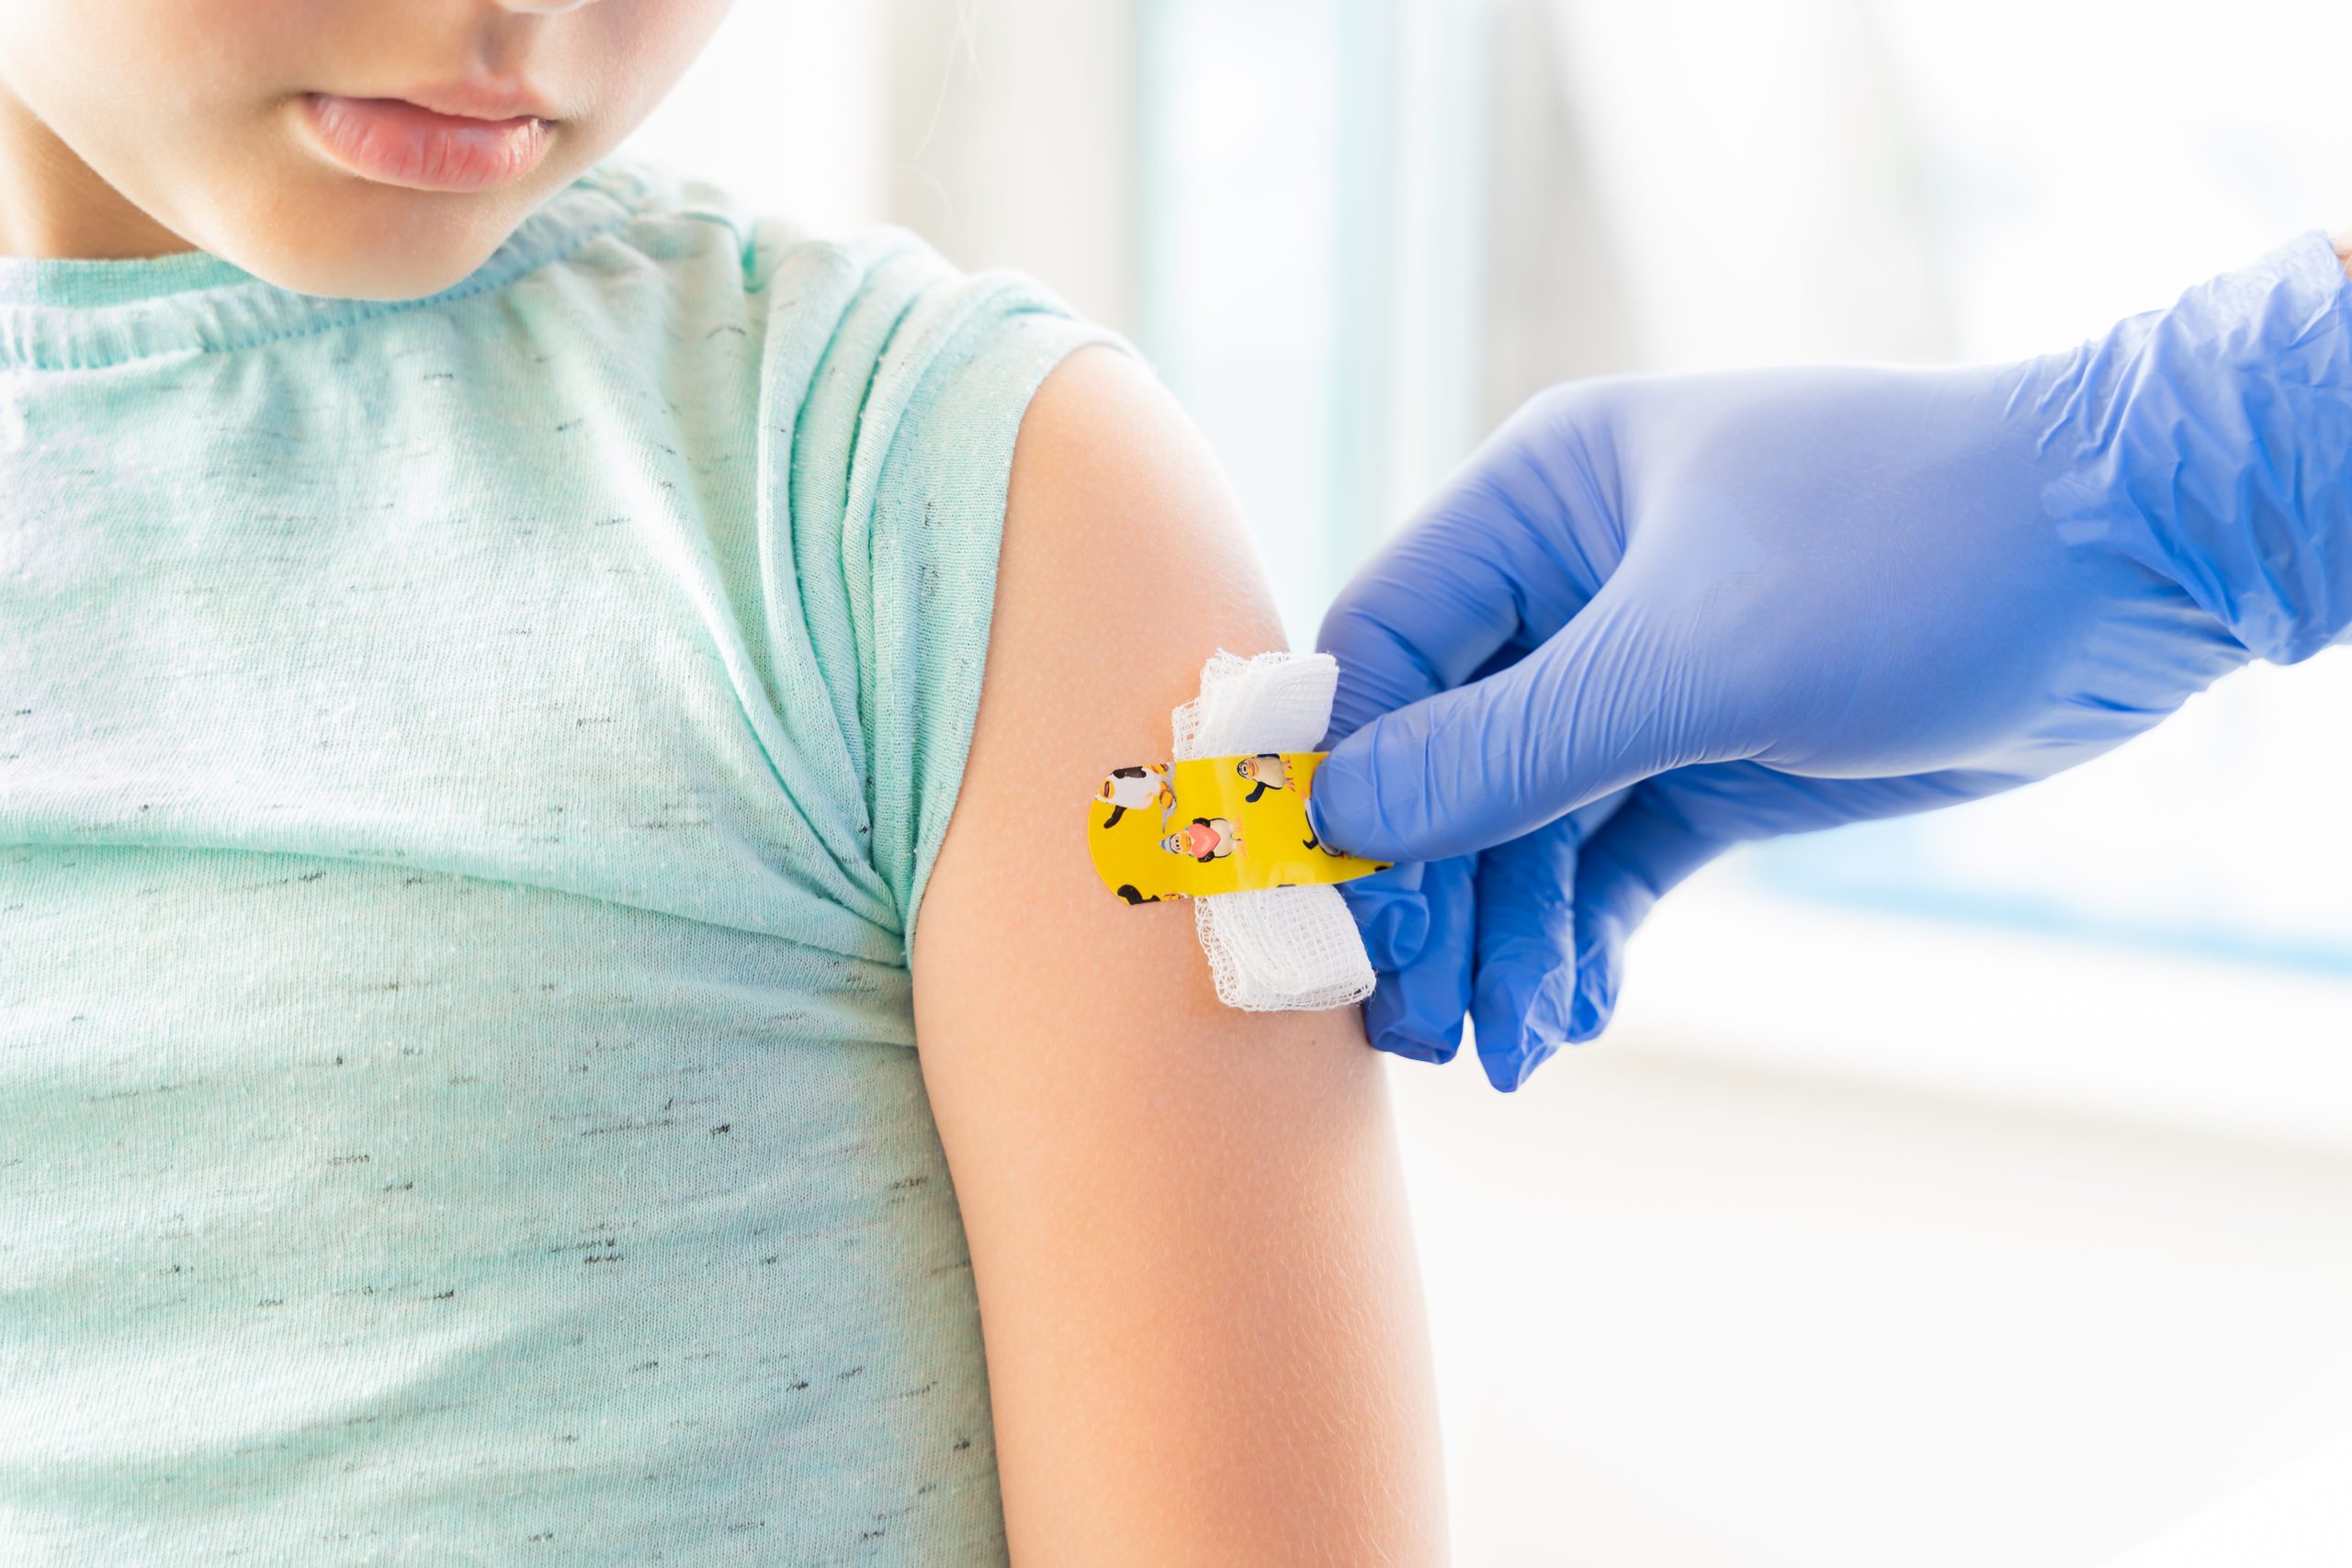 COVID-19 Vaccines Authorized for Children and Adolescents